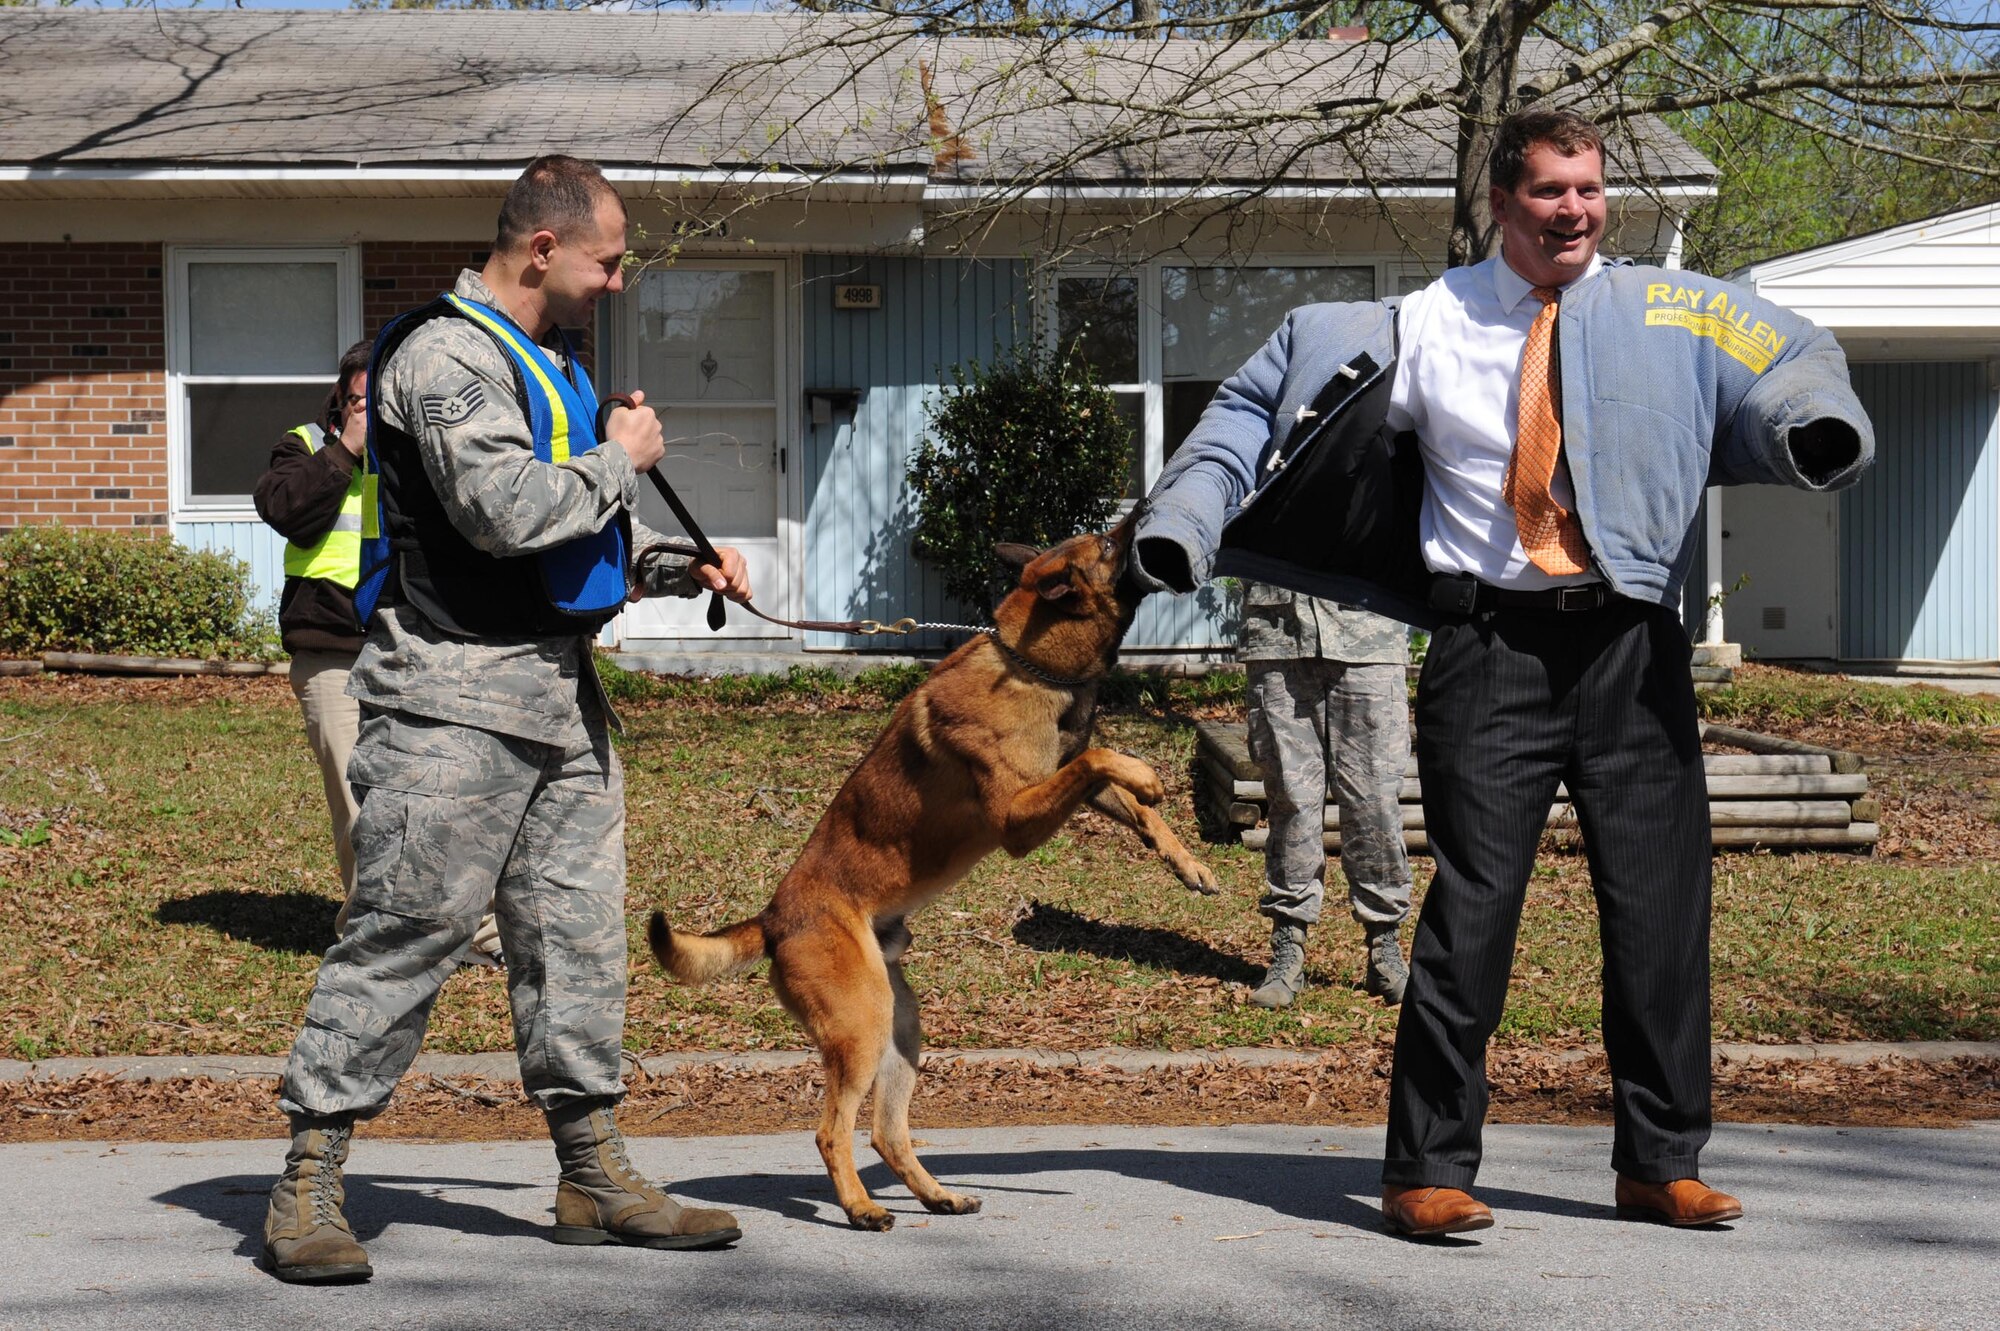 SHAW AIR FORCE BASE, S.C. -- Staff Sergeant Chris LeBlanc, 20th Security Forces K-9 dog handler, and his military working dog, Zorba, demonstrate use of force by letting Dean McCormick, Sumter city manager, wear a protective outer garment April 4, 2009. The Sumter County Police Department and Shaw Airmen utilized older base housing for police training scenarios. (U.S. Air Force photo/Senior Airman Matt Davis)